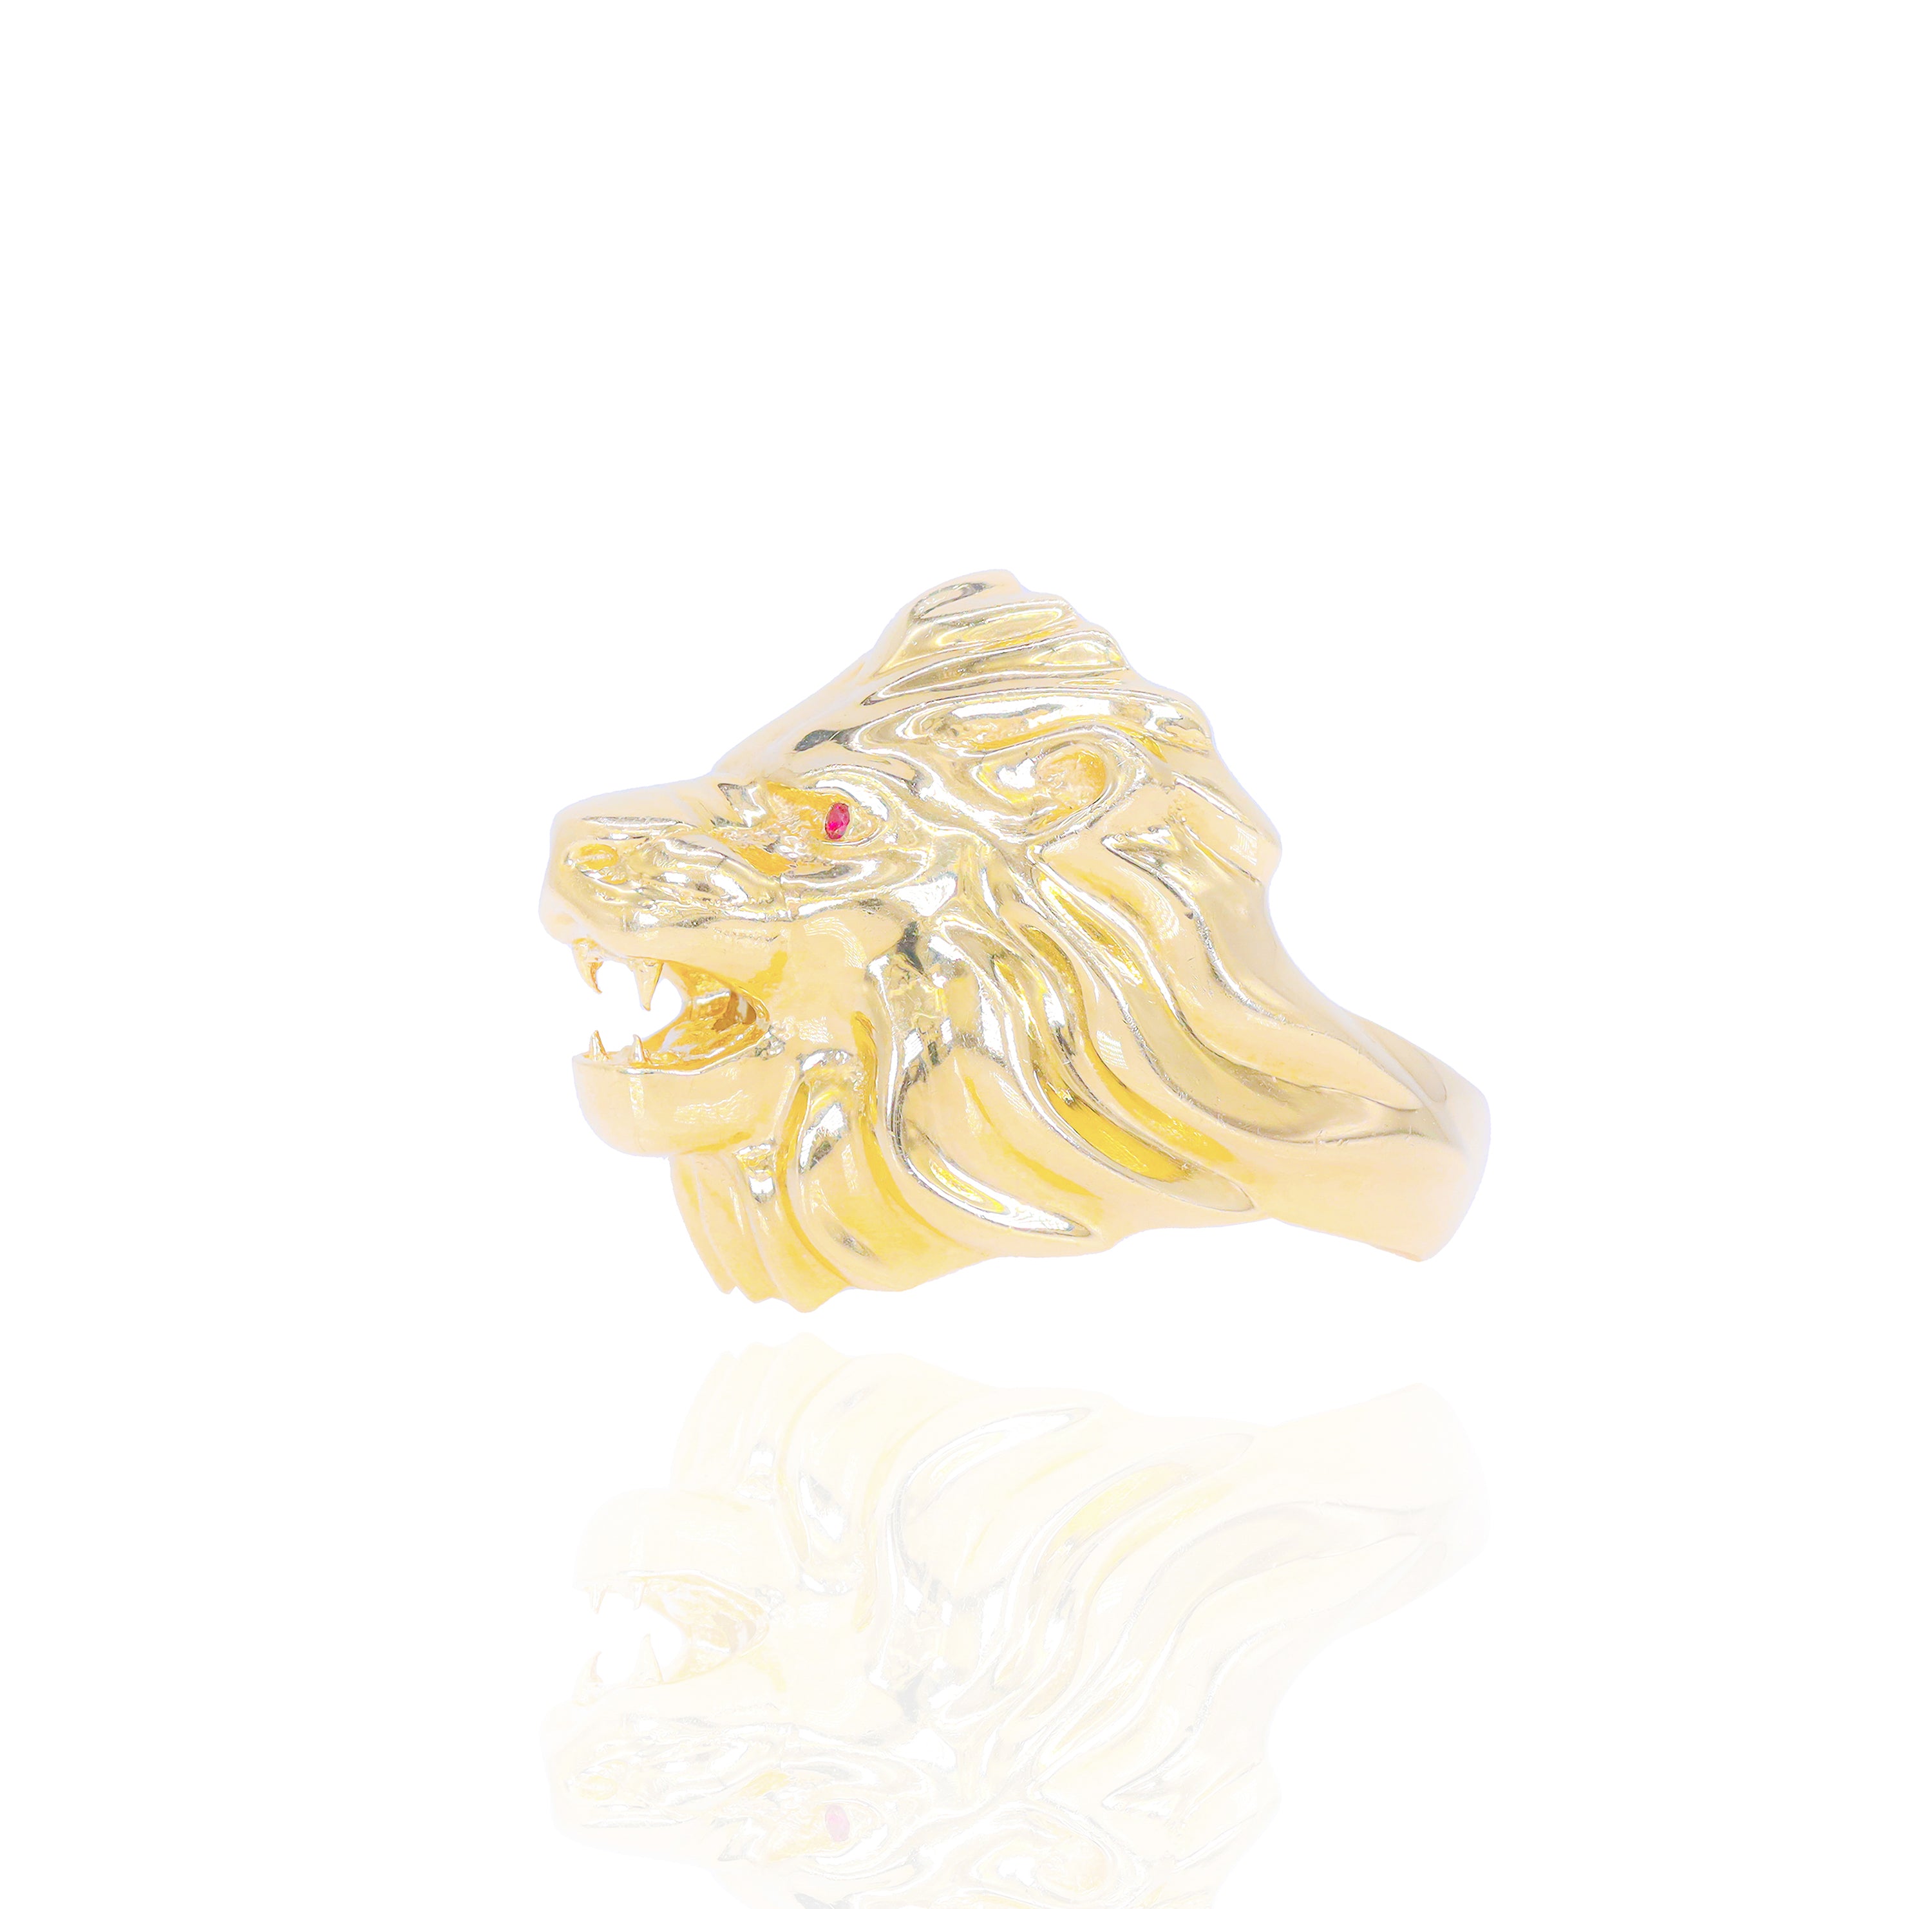 Lion Head Solid Gold Ring w/ Red Rubies Eyes